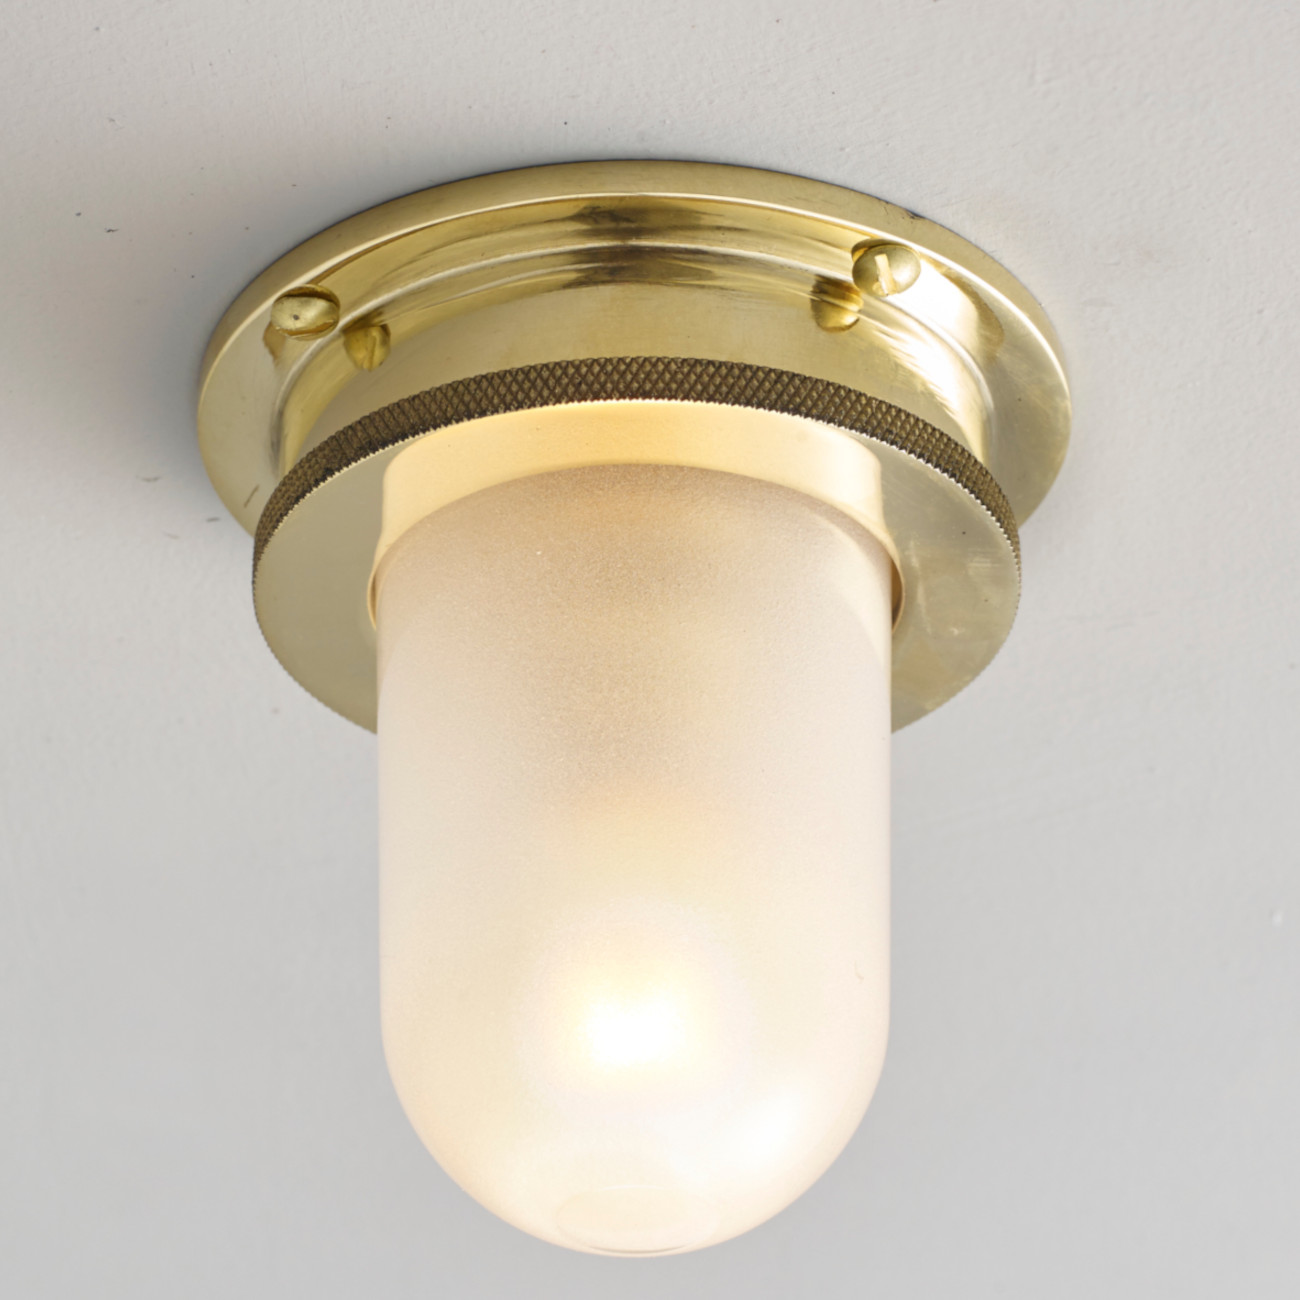 Miniature Ship's Companionway Ceiling Light in Brass 7202